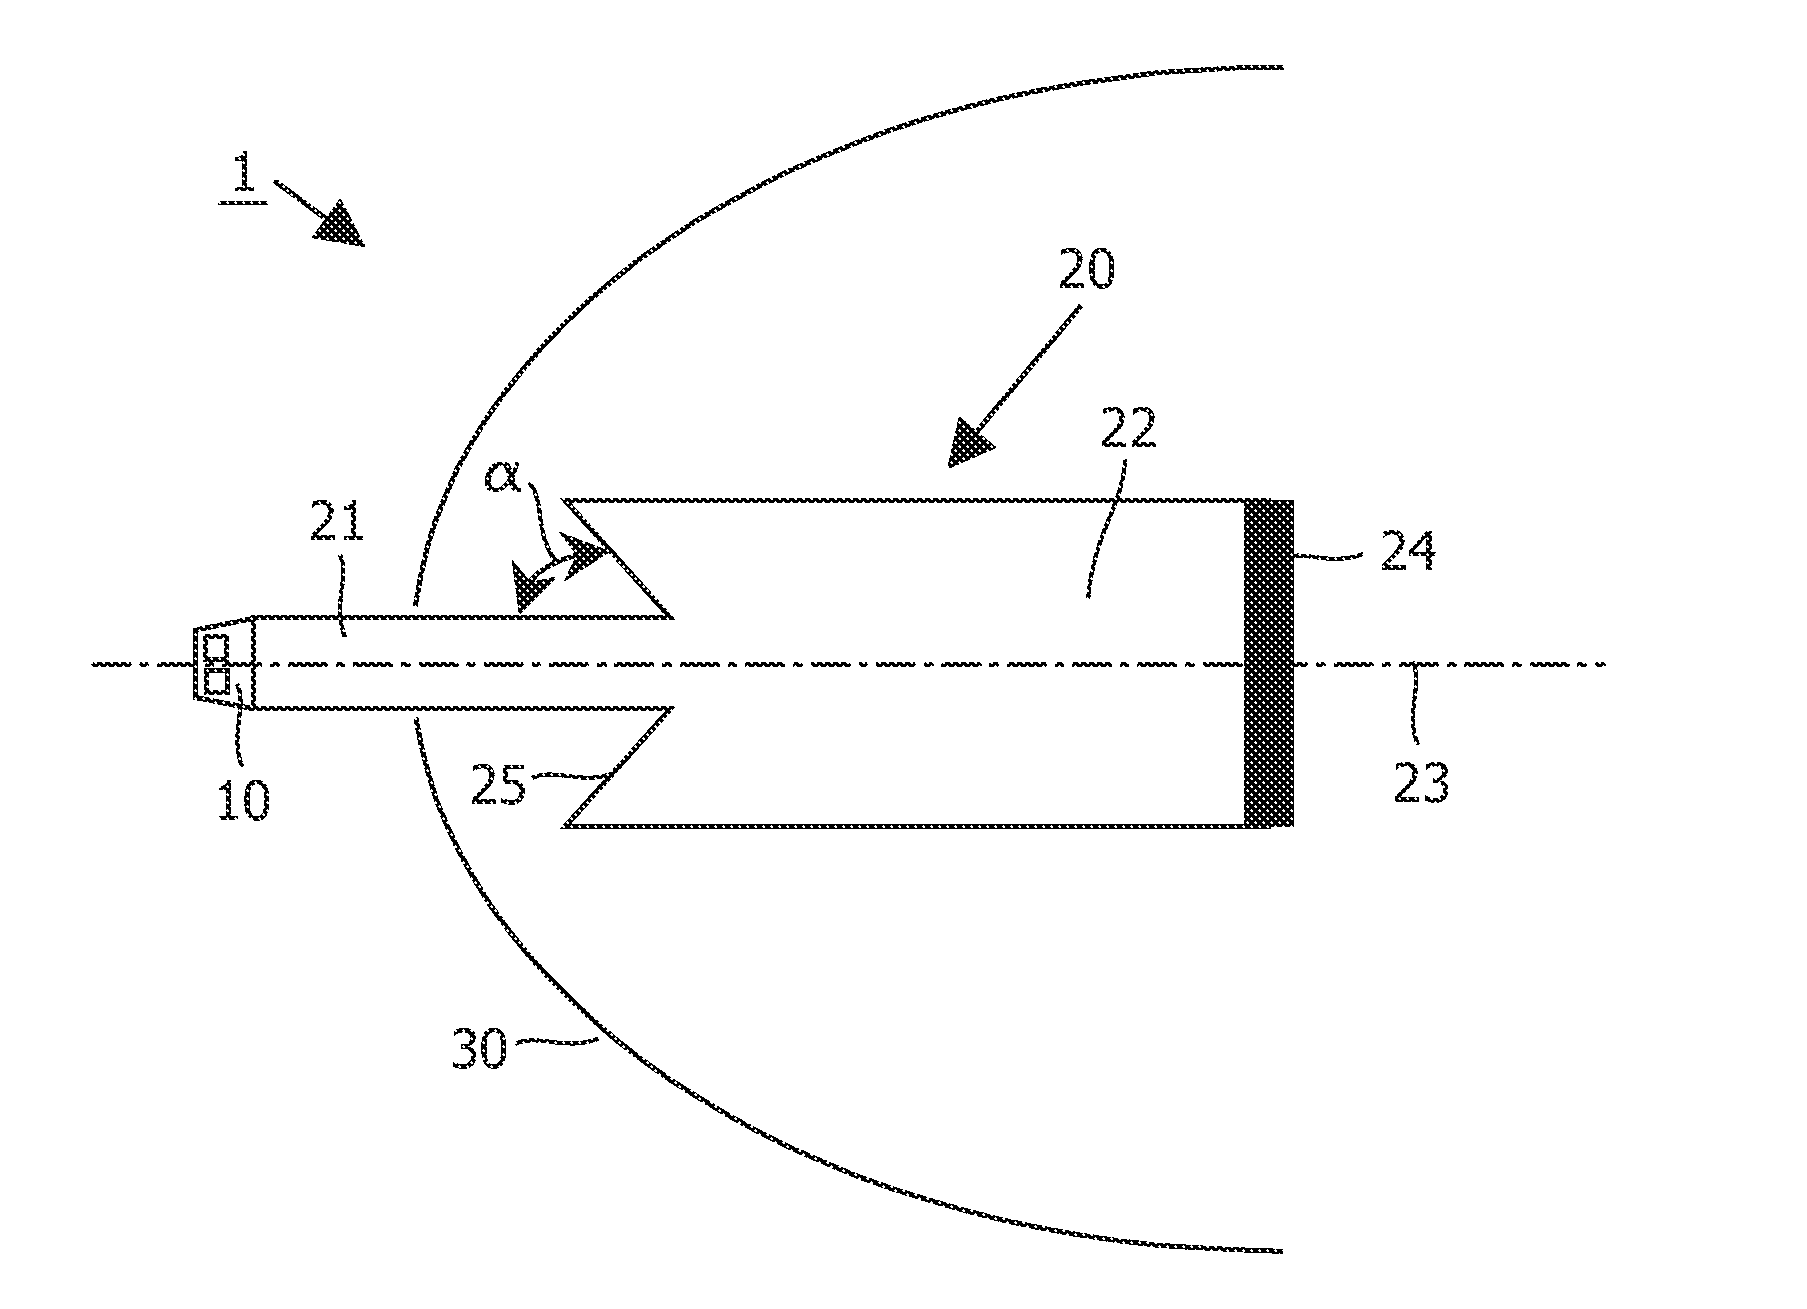 Illumination device comprising a light source and a light-guide